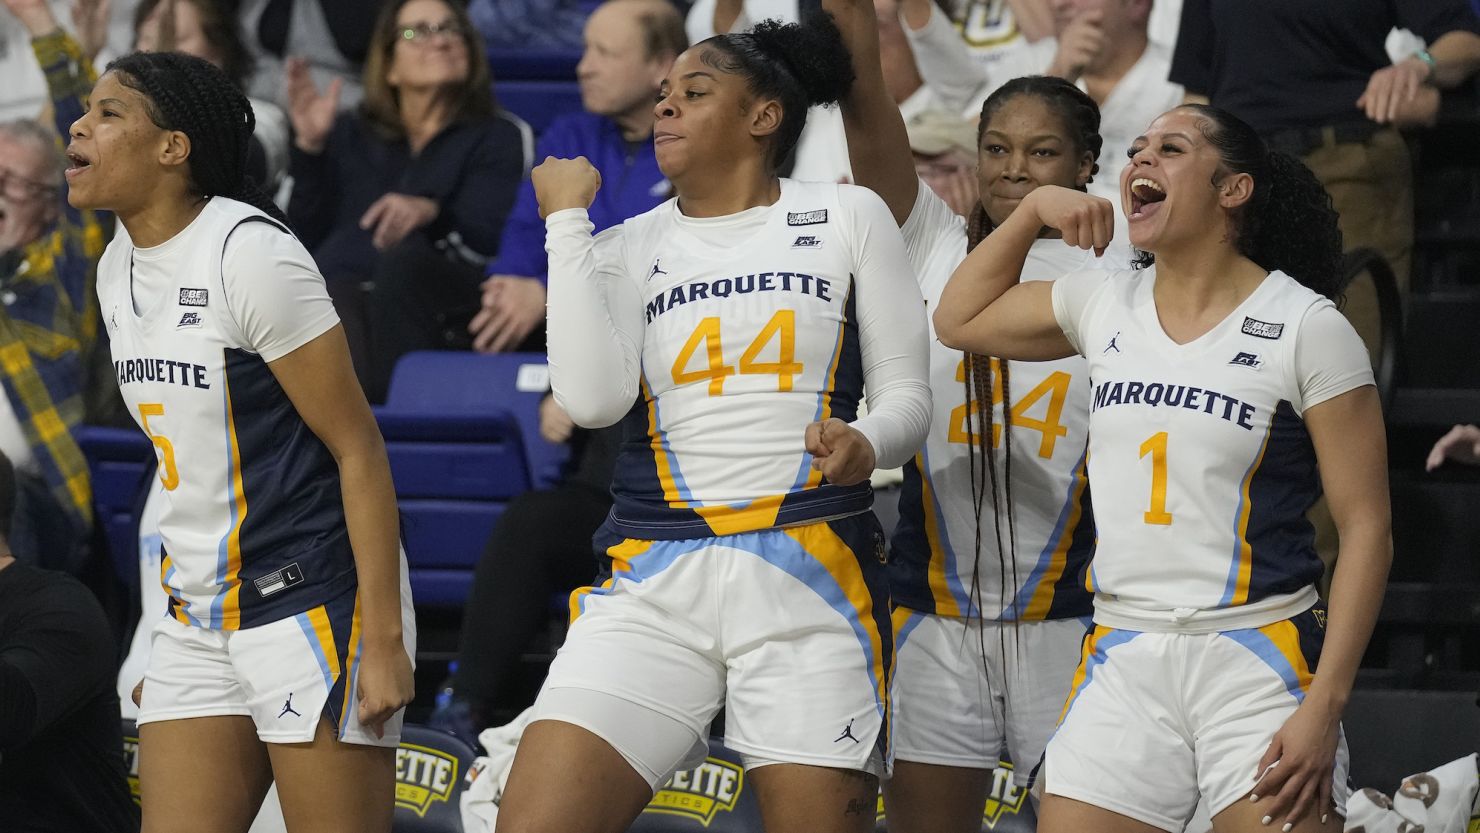 The Marquette Golden Eagles defeated the UConn Huskies for the first time, after 16 prior meets.